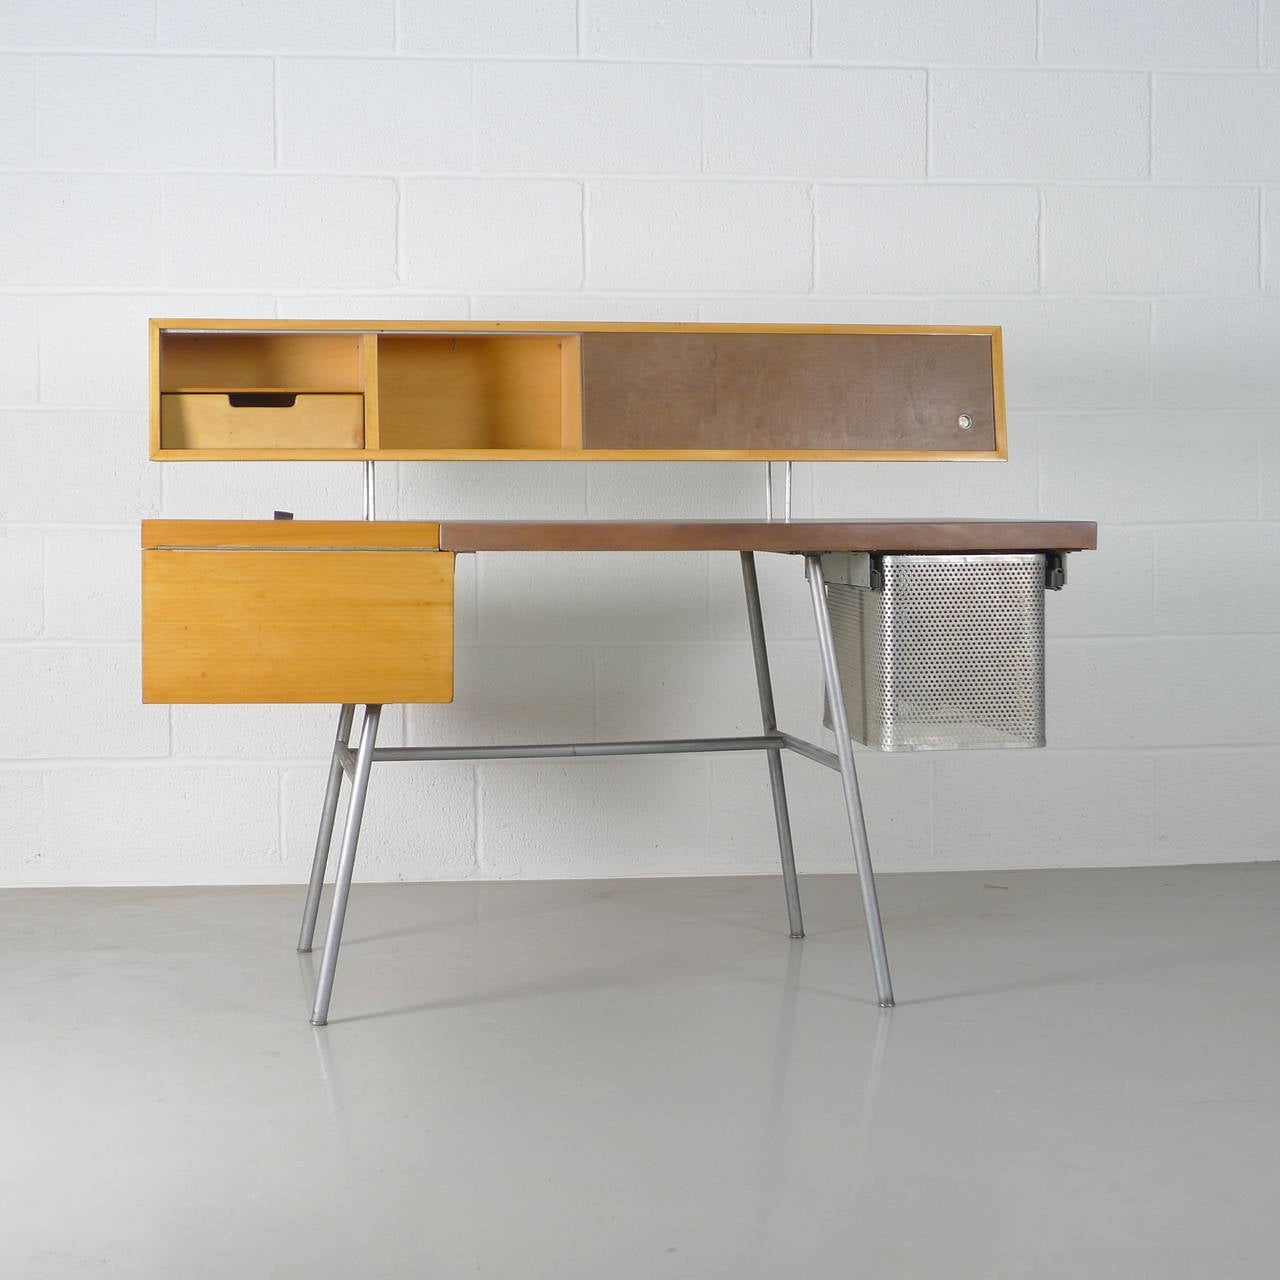 George Nelson for Herman Miller, USA, circa 1948. Home office desk, model #4658. Steel frame with perforated steel file holder, leather and wood top. Floating back with sliding doors in leather to reveal original wooden shelving and